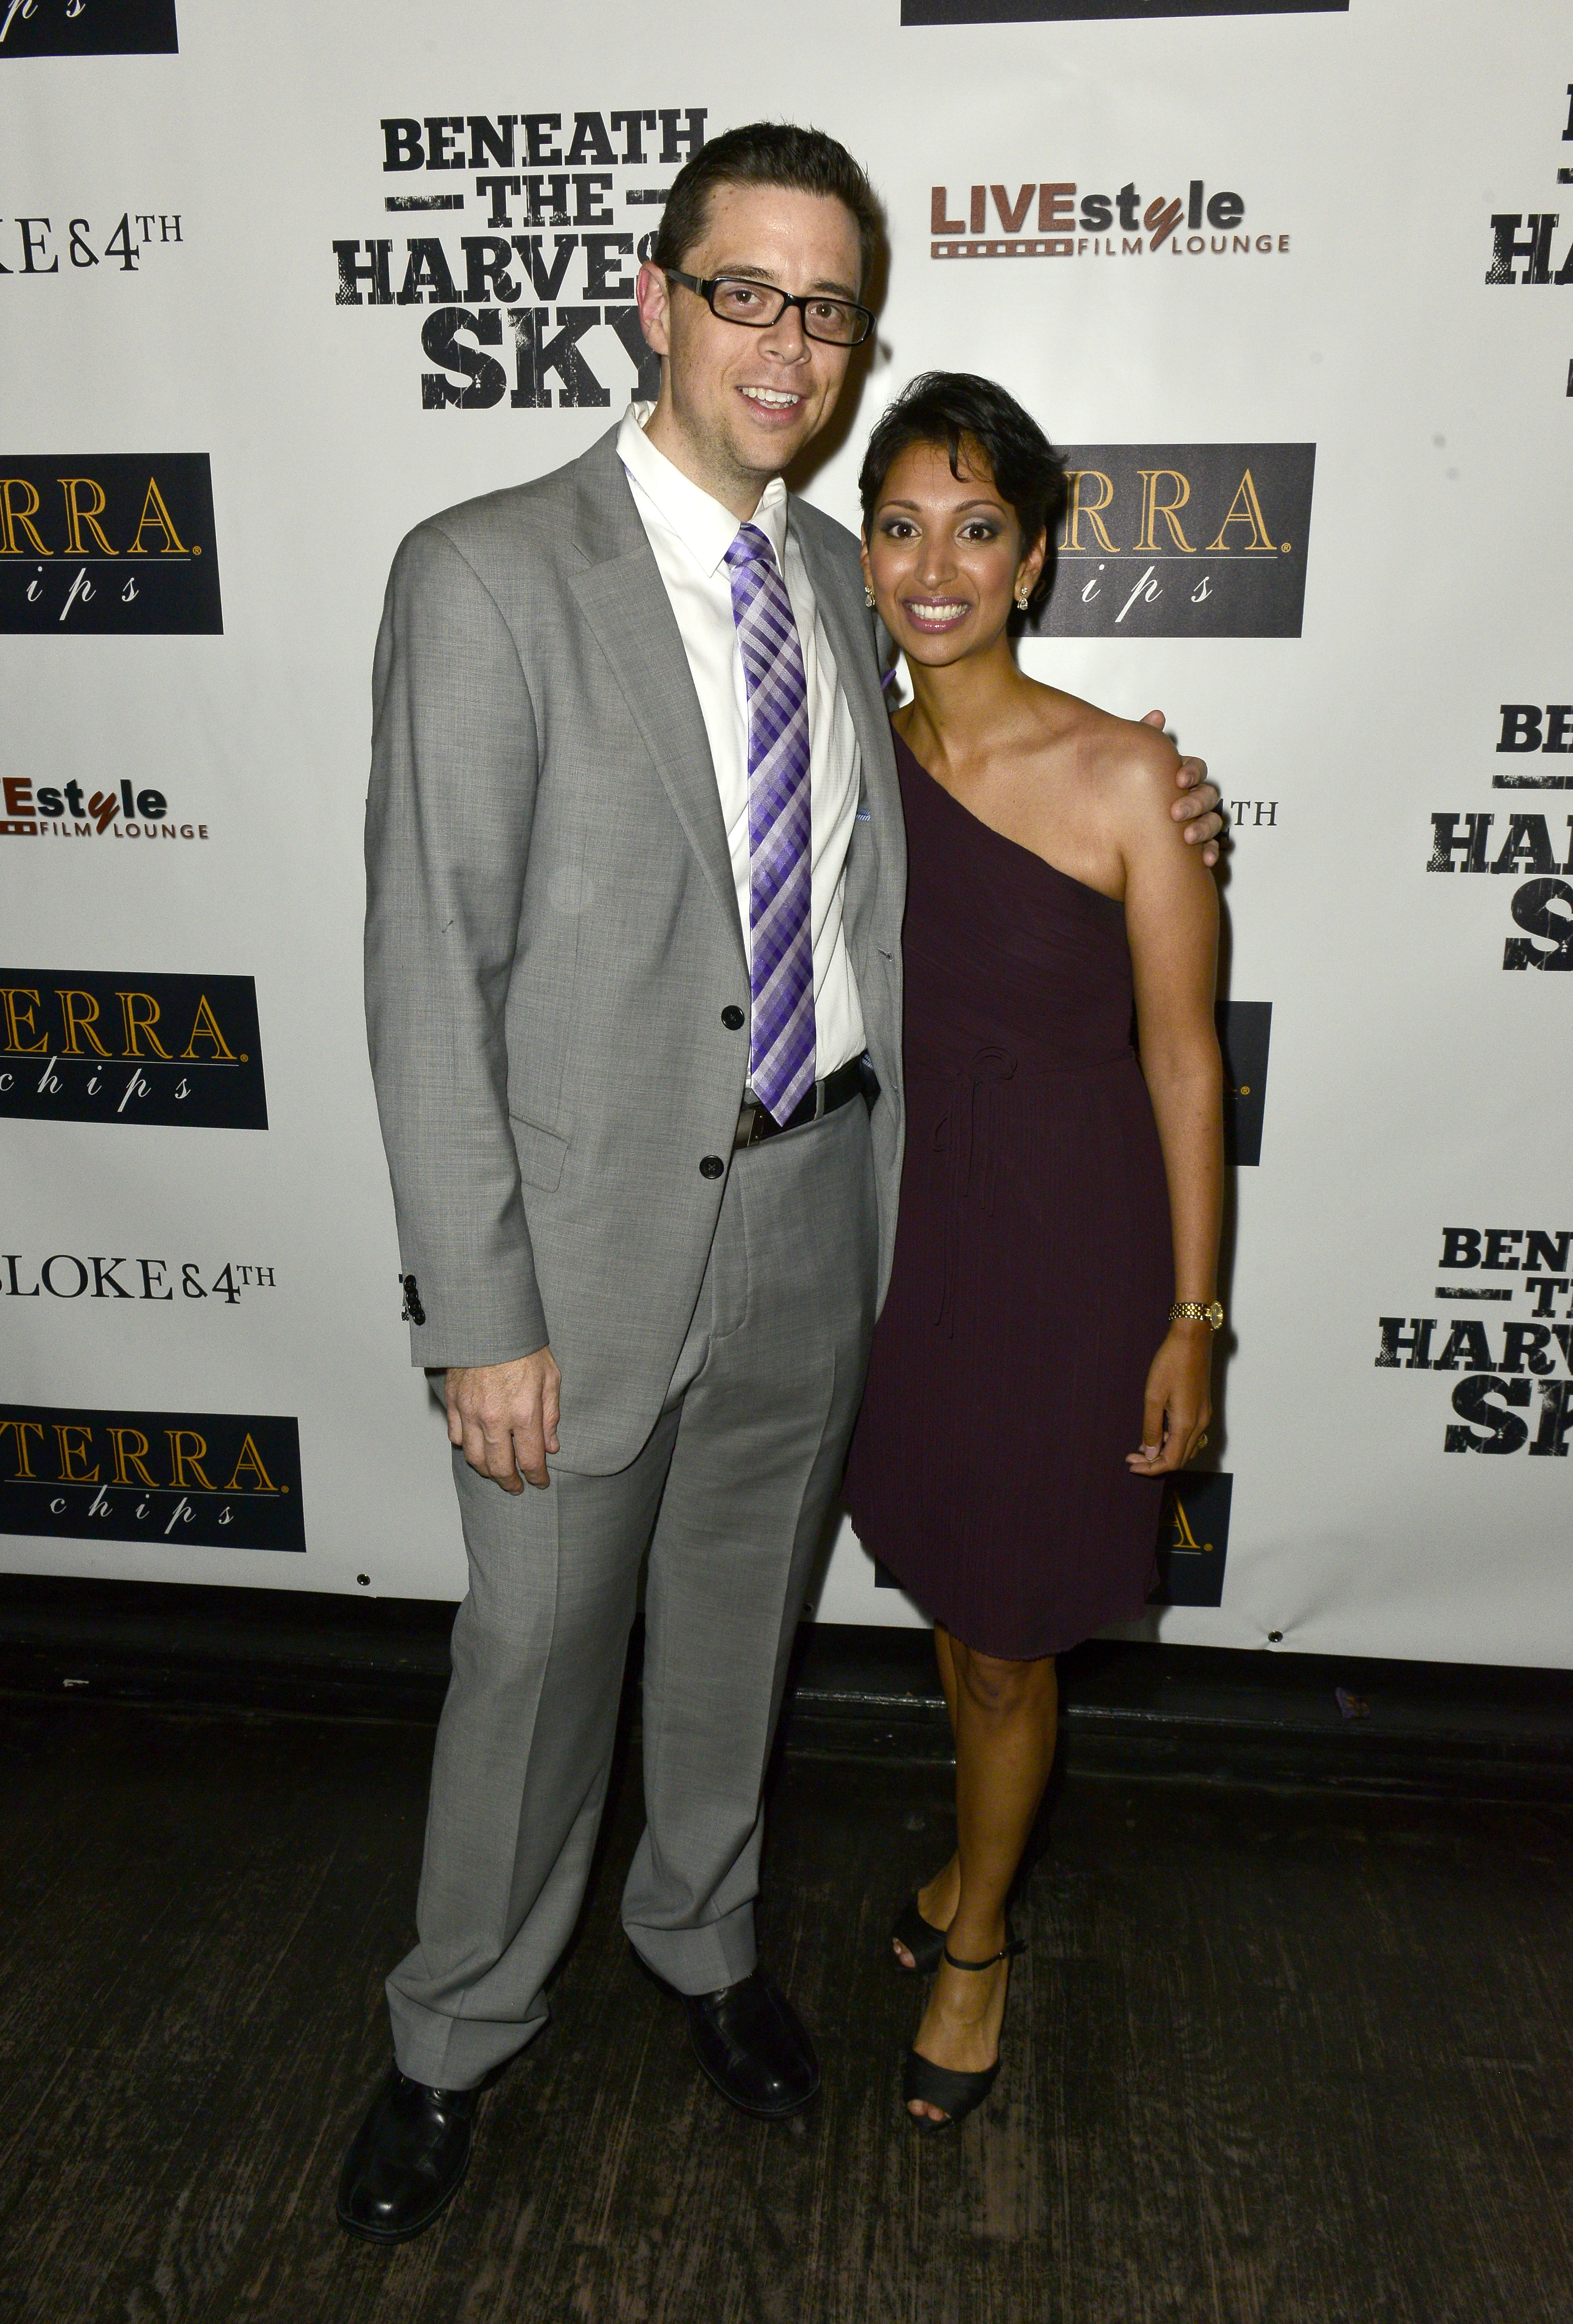 Directors Aron Gaudet and Gita Pullapilly at the Beneath The Harvest Sky/ Terra Chips after part at the Toronto International Film Festival 2013